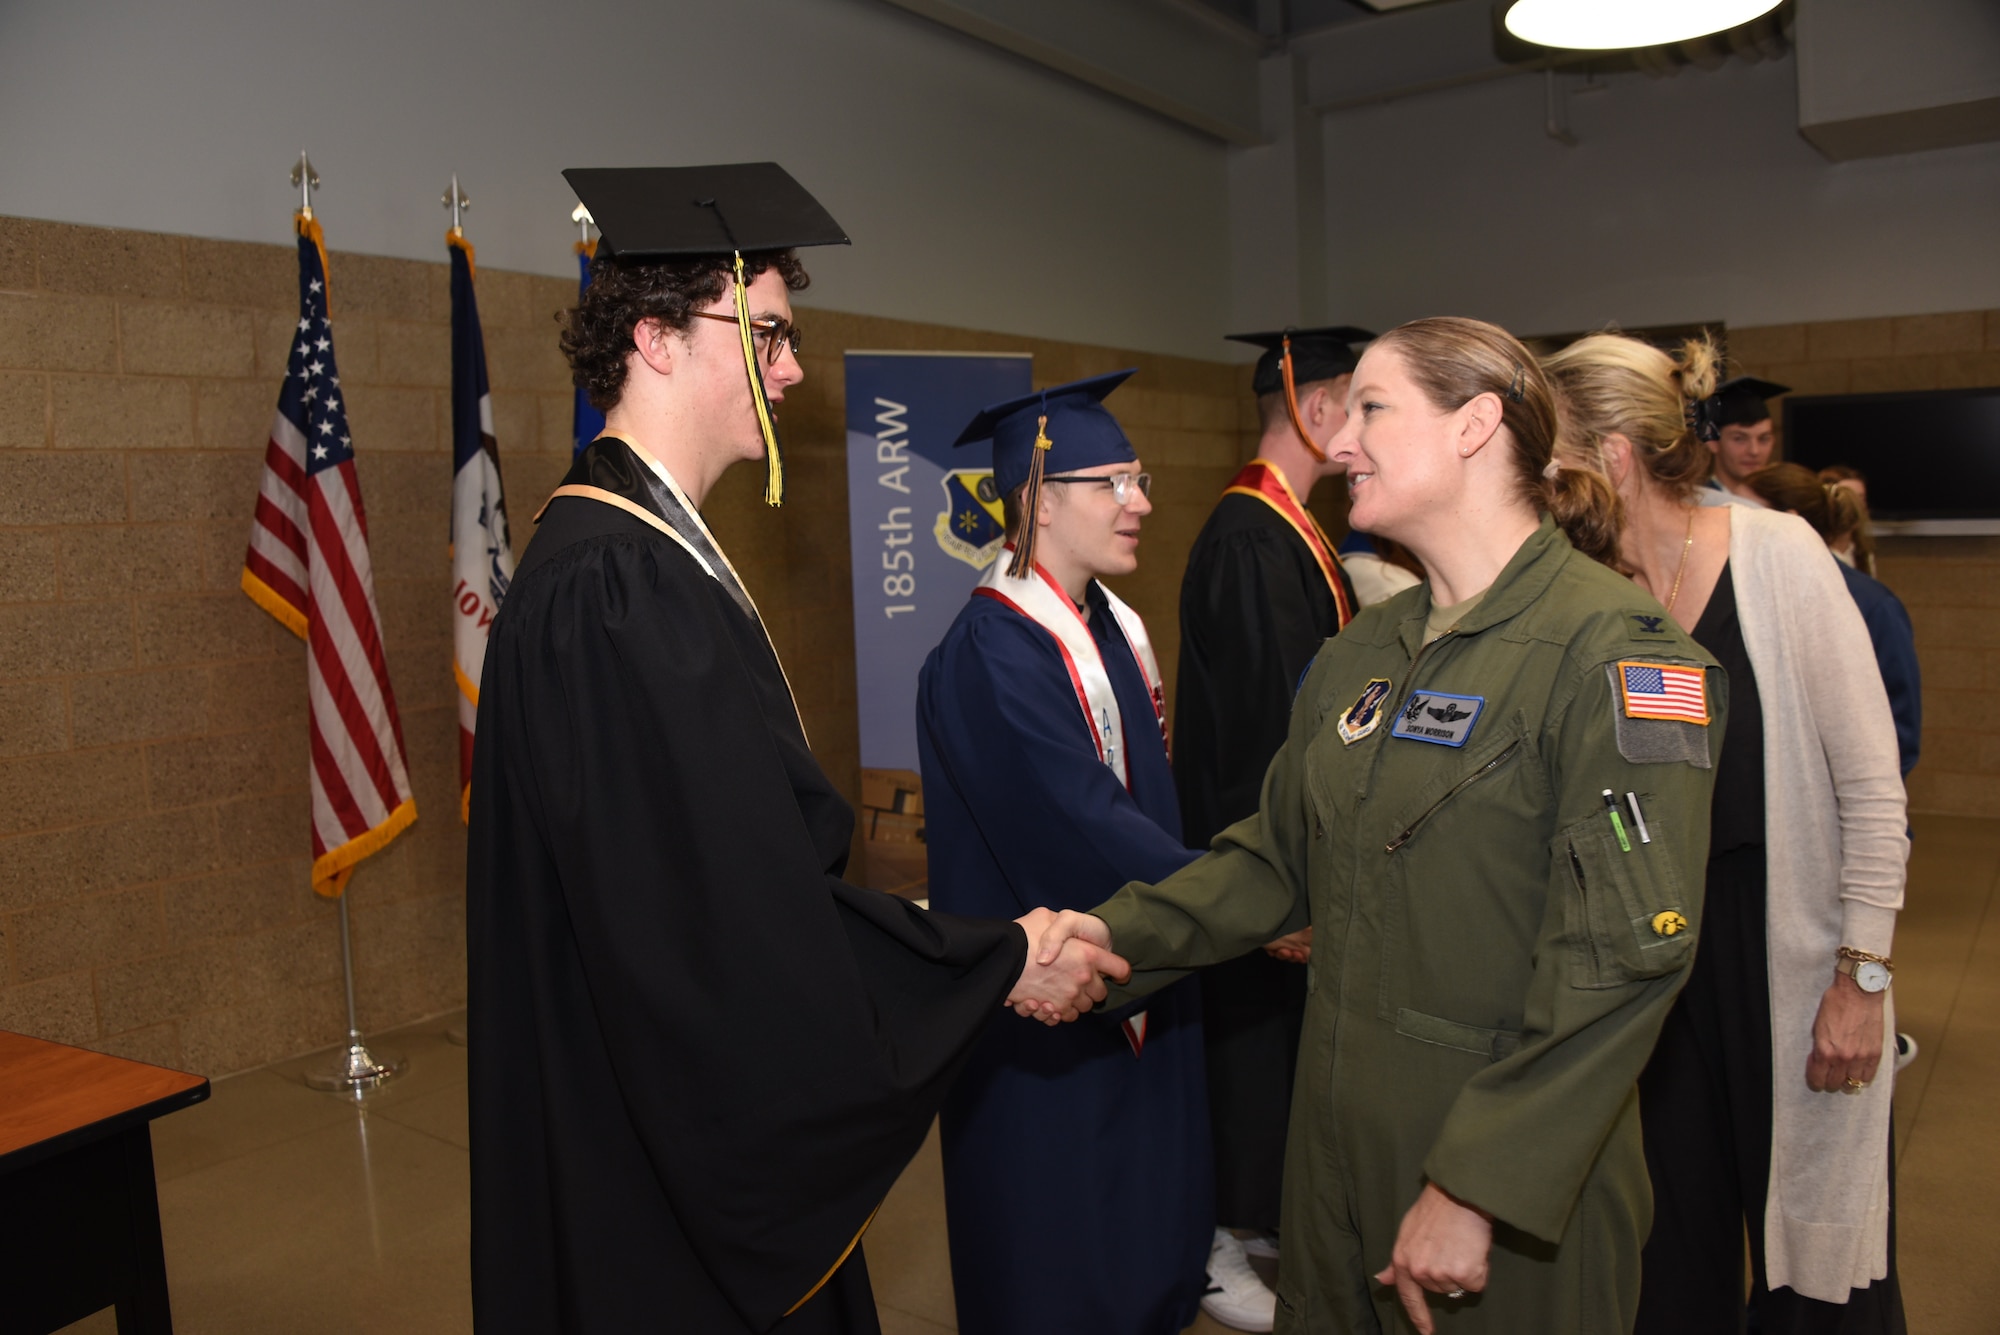 Graduating high school students in Iowa are honored with graduation stoles decorated with special military stoles.